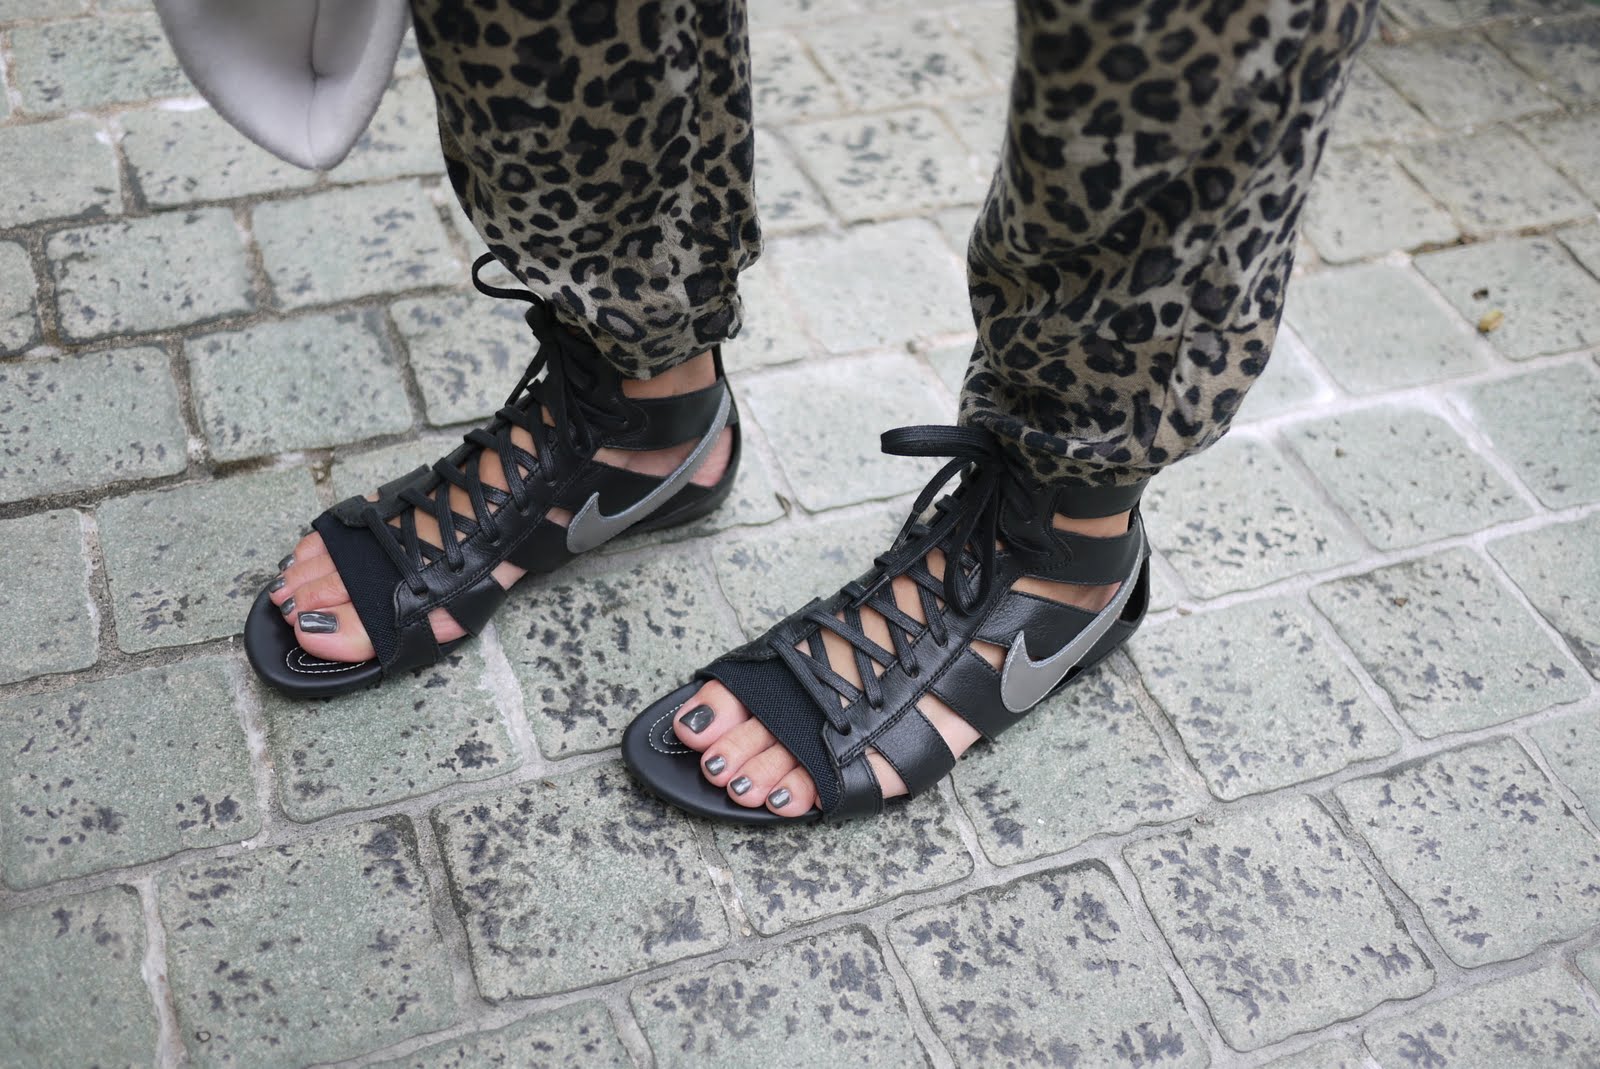 who has the nike gladiator sandals? | Yahoo Answers